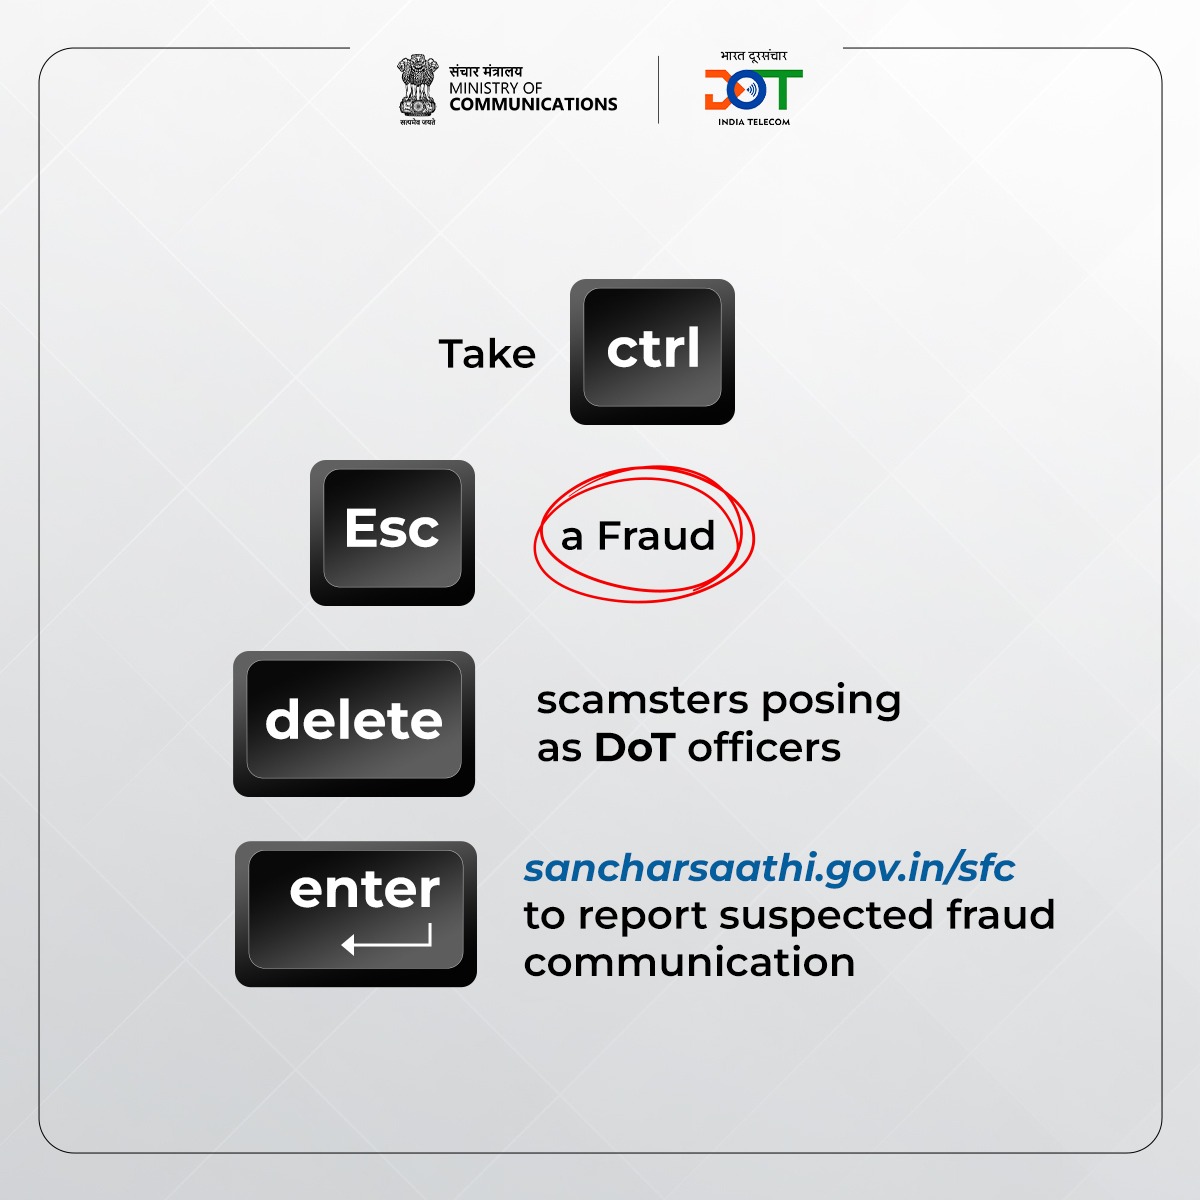 Getting calls from scamsters posing as DoT officers? Don't worry! We never make such calls threatening disconnection. ➡️ sancharsaathi.gov.in/sfc to report Suspected fraud communication